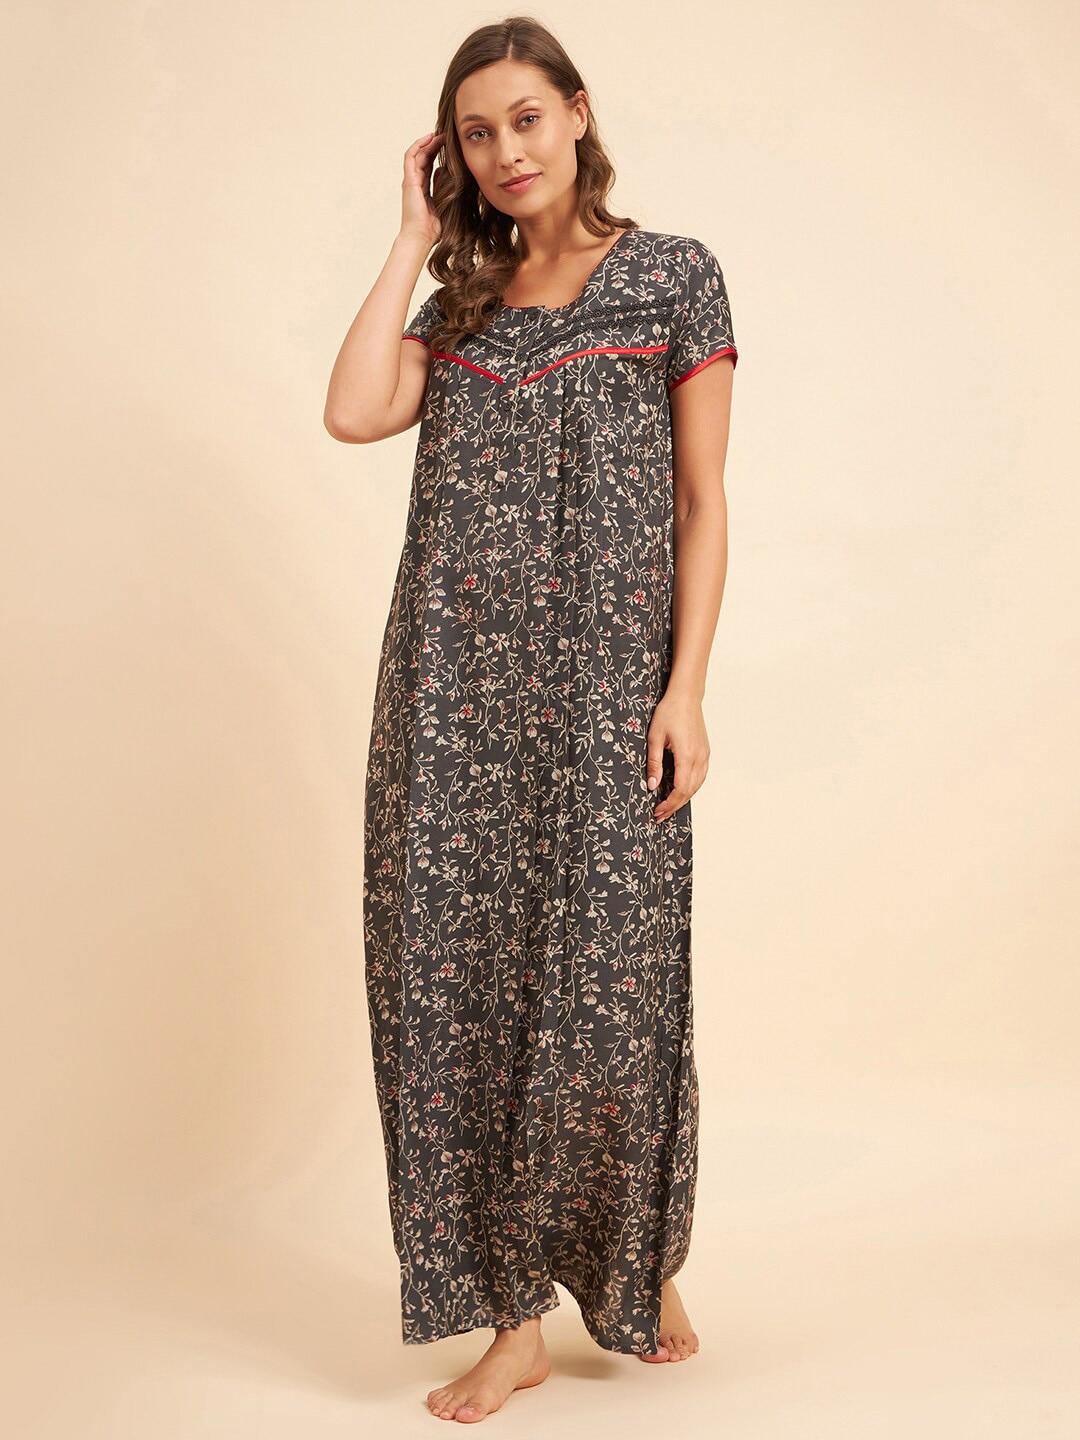 Sweet Dreams Grey & White Floral Printed Maxi Nightdress